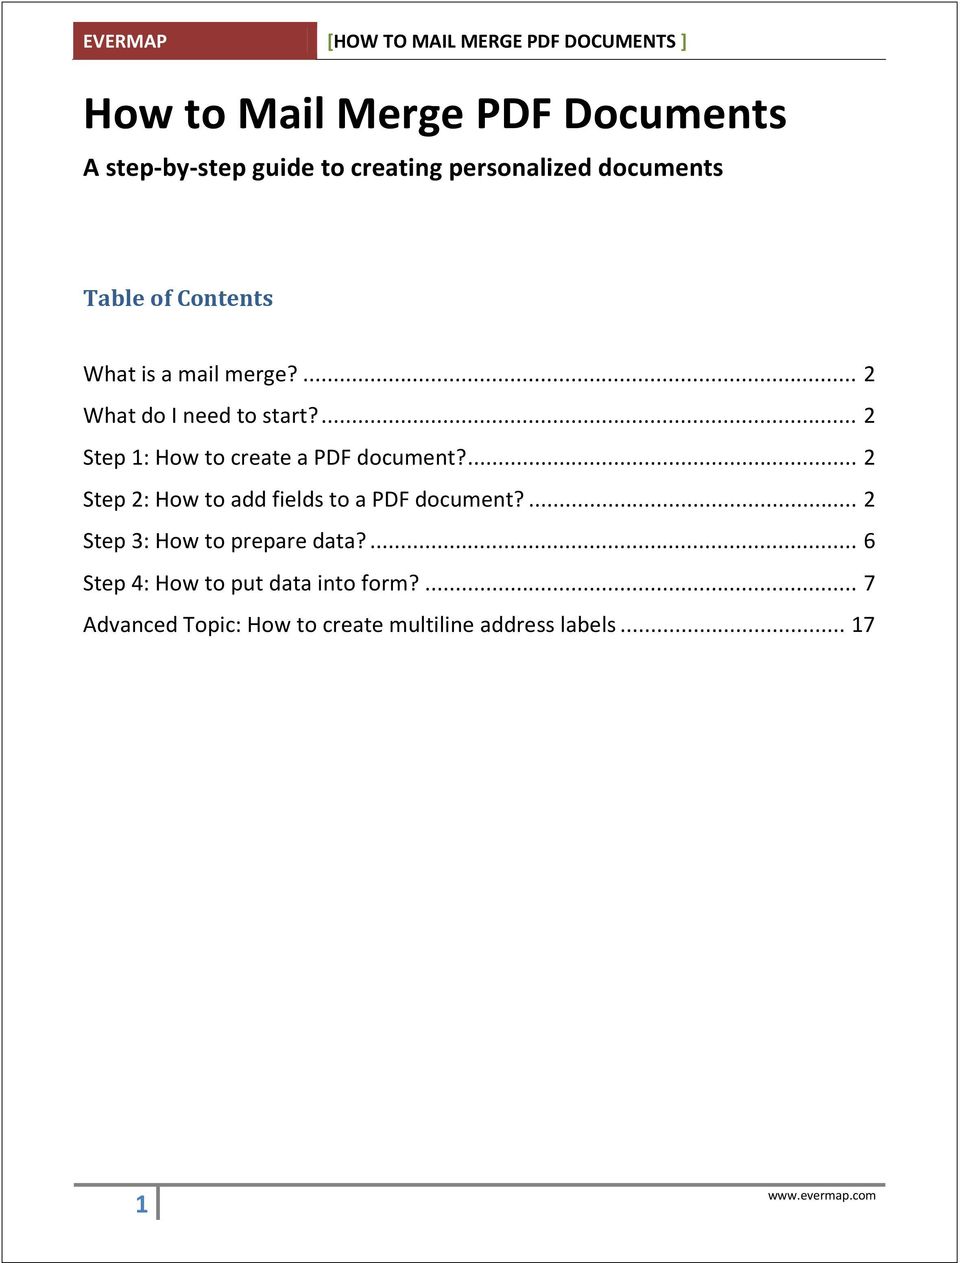 ... 2 Step 1: How to create a PDF document?... 2 Step 2: How to add fields to a PDF document?